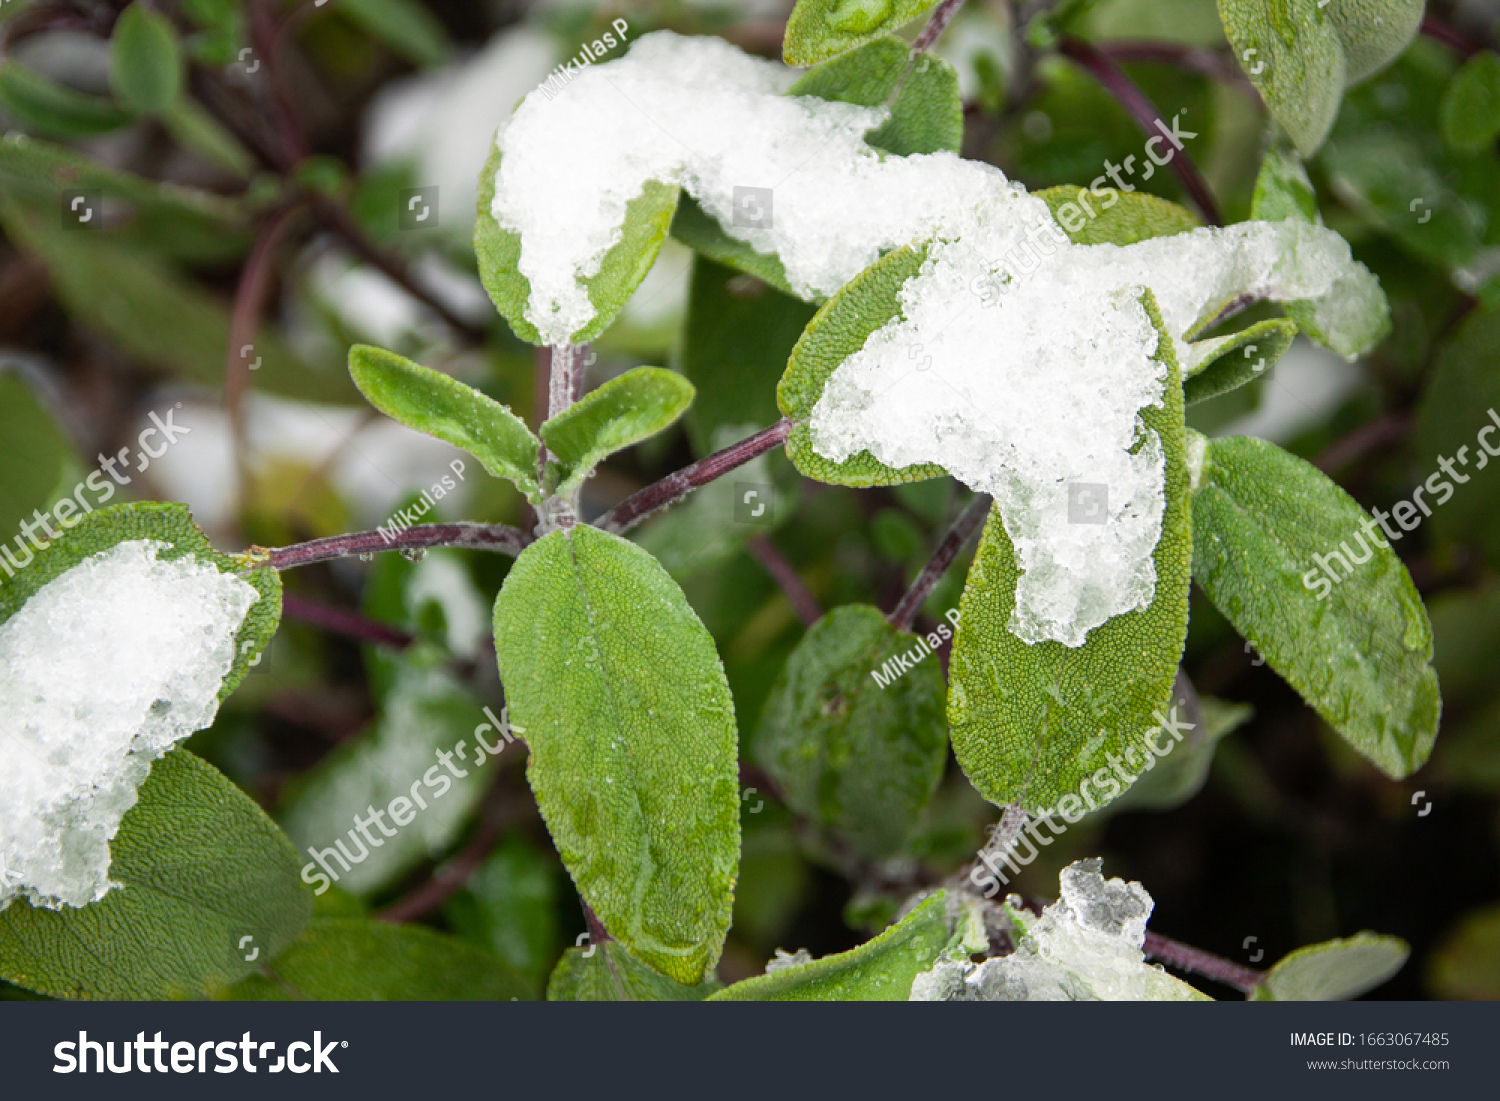 Snow Covered Common Sage Leaves Salvia officinalis in a Small Garden in Spring #1663067485